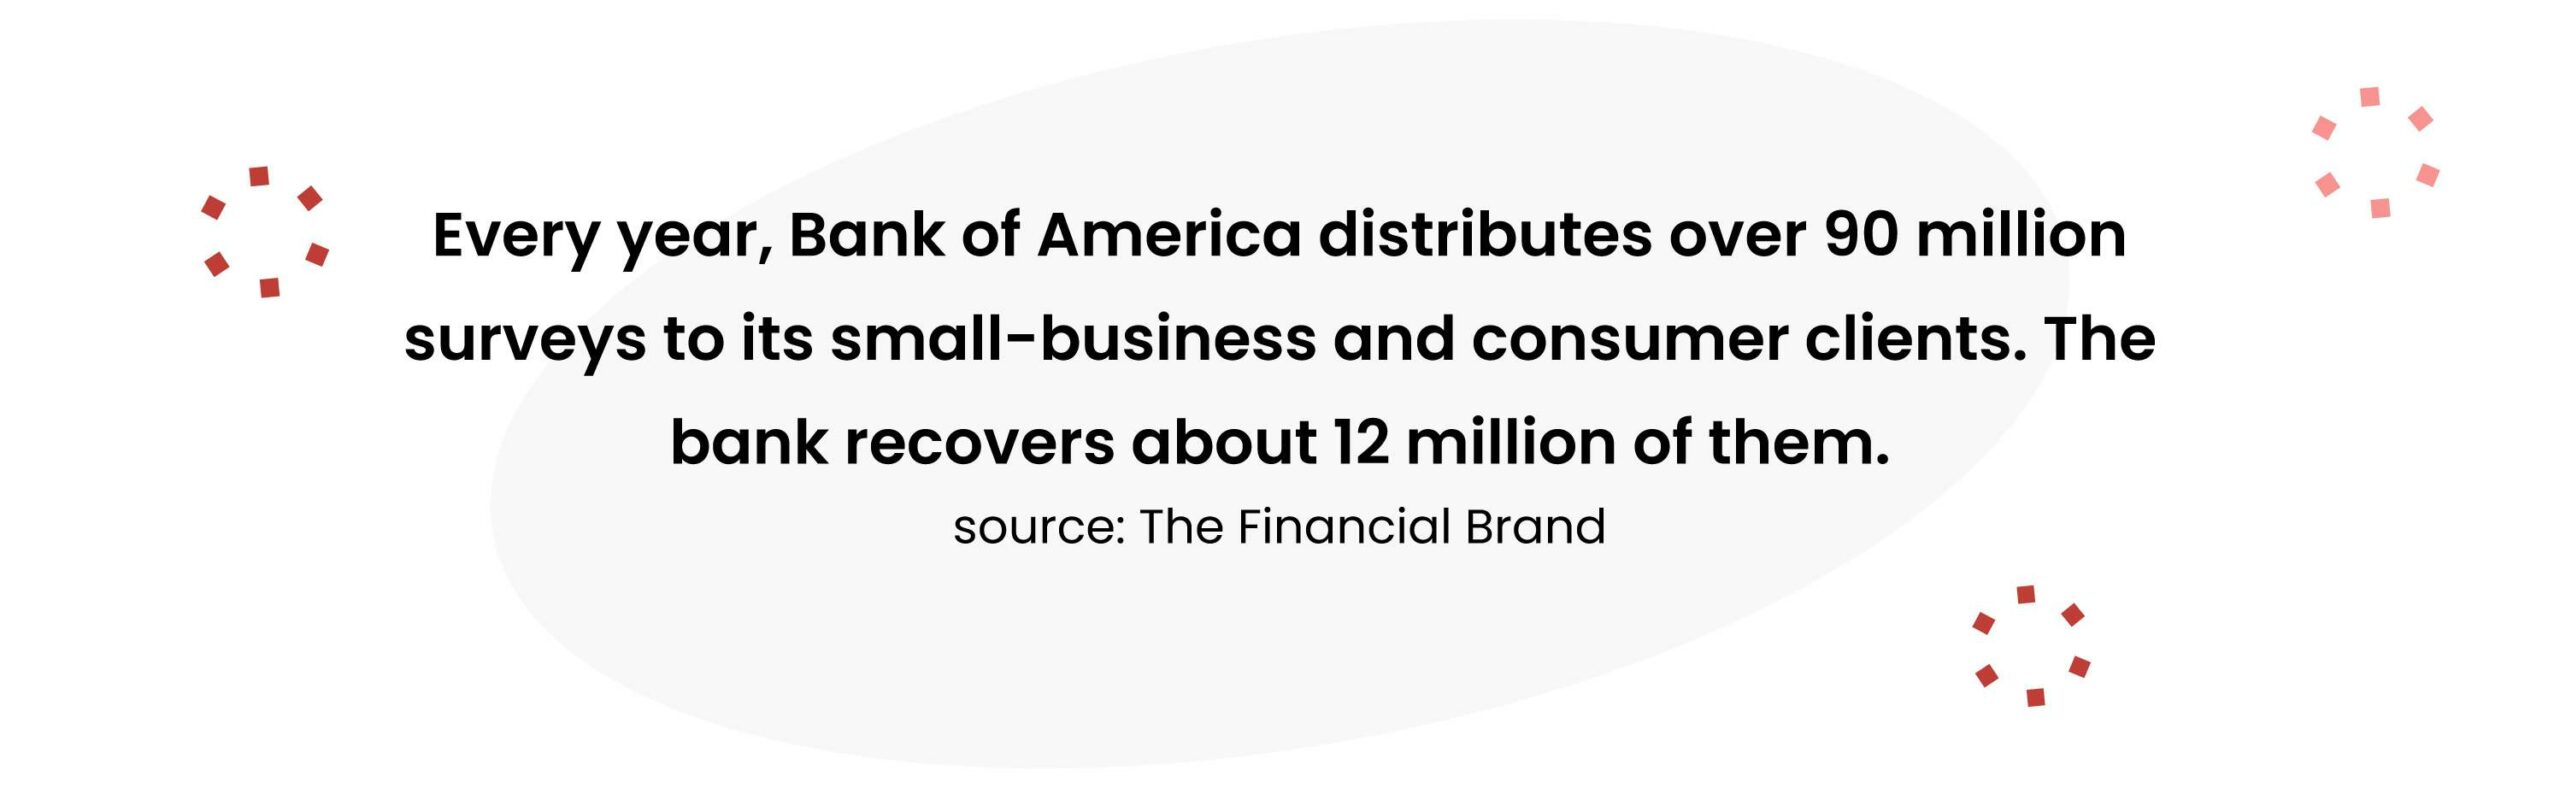 "Every year, Bank of America distributes over 90 million surveys to its small business and consumer clients. The bank recovers about 12 million of them."